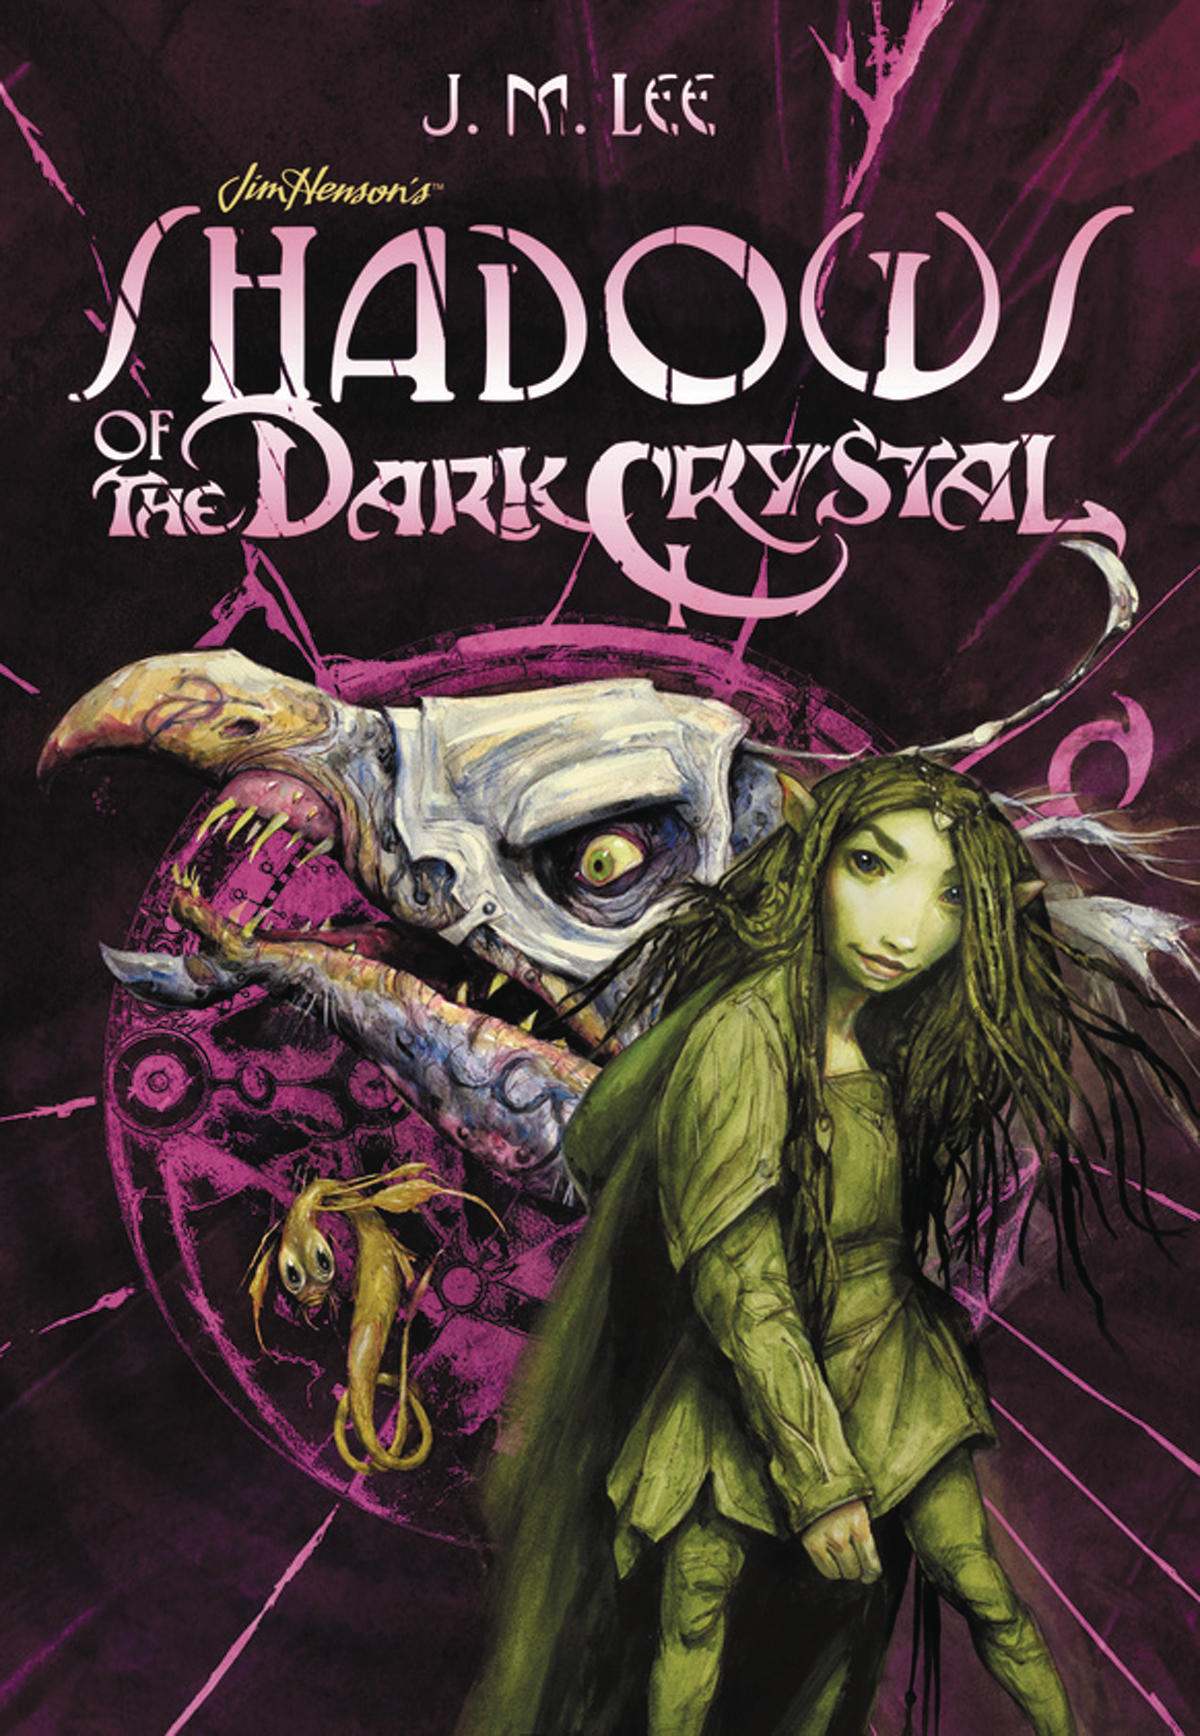 Friday Reads: Sahdows of the Dark Crystal by J.M. Lee